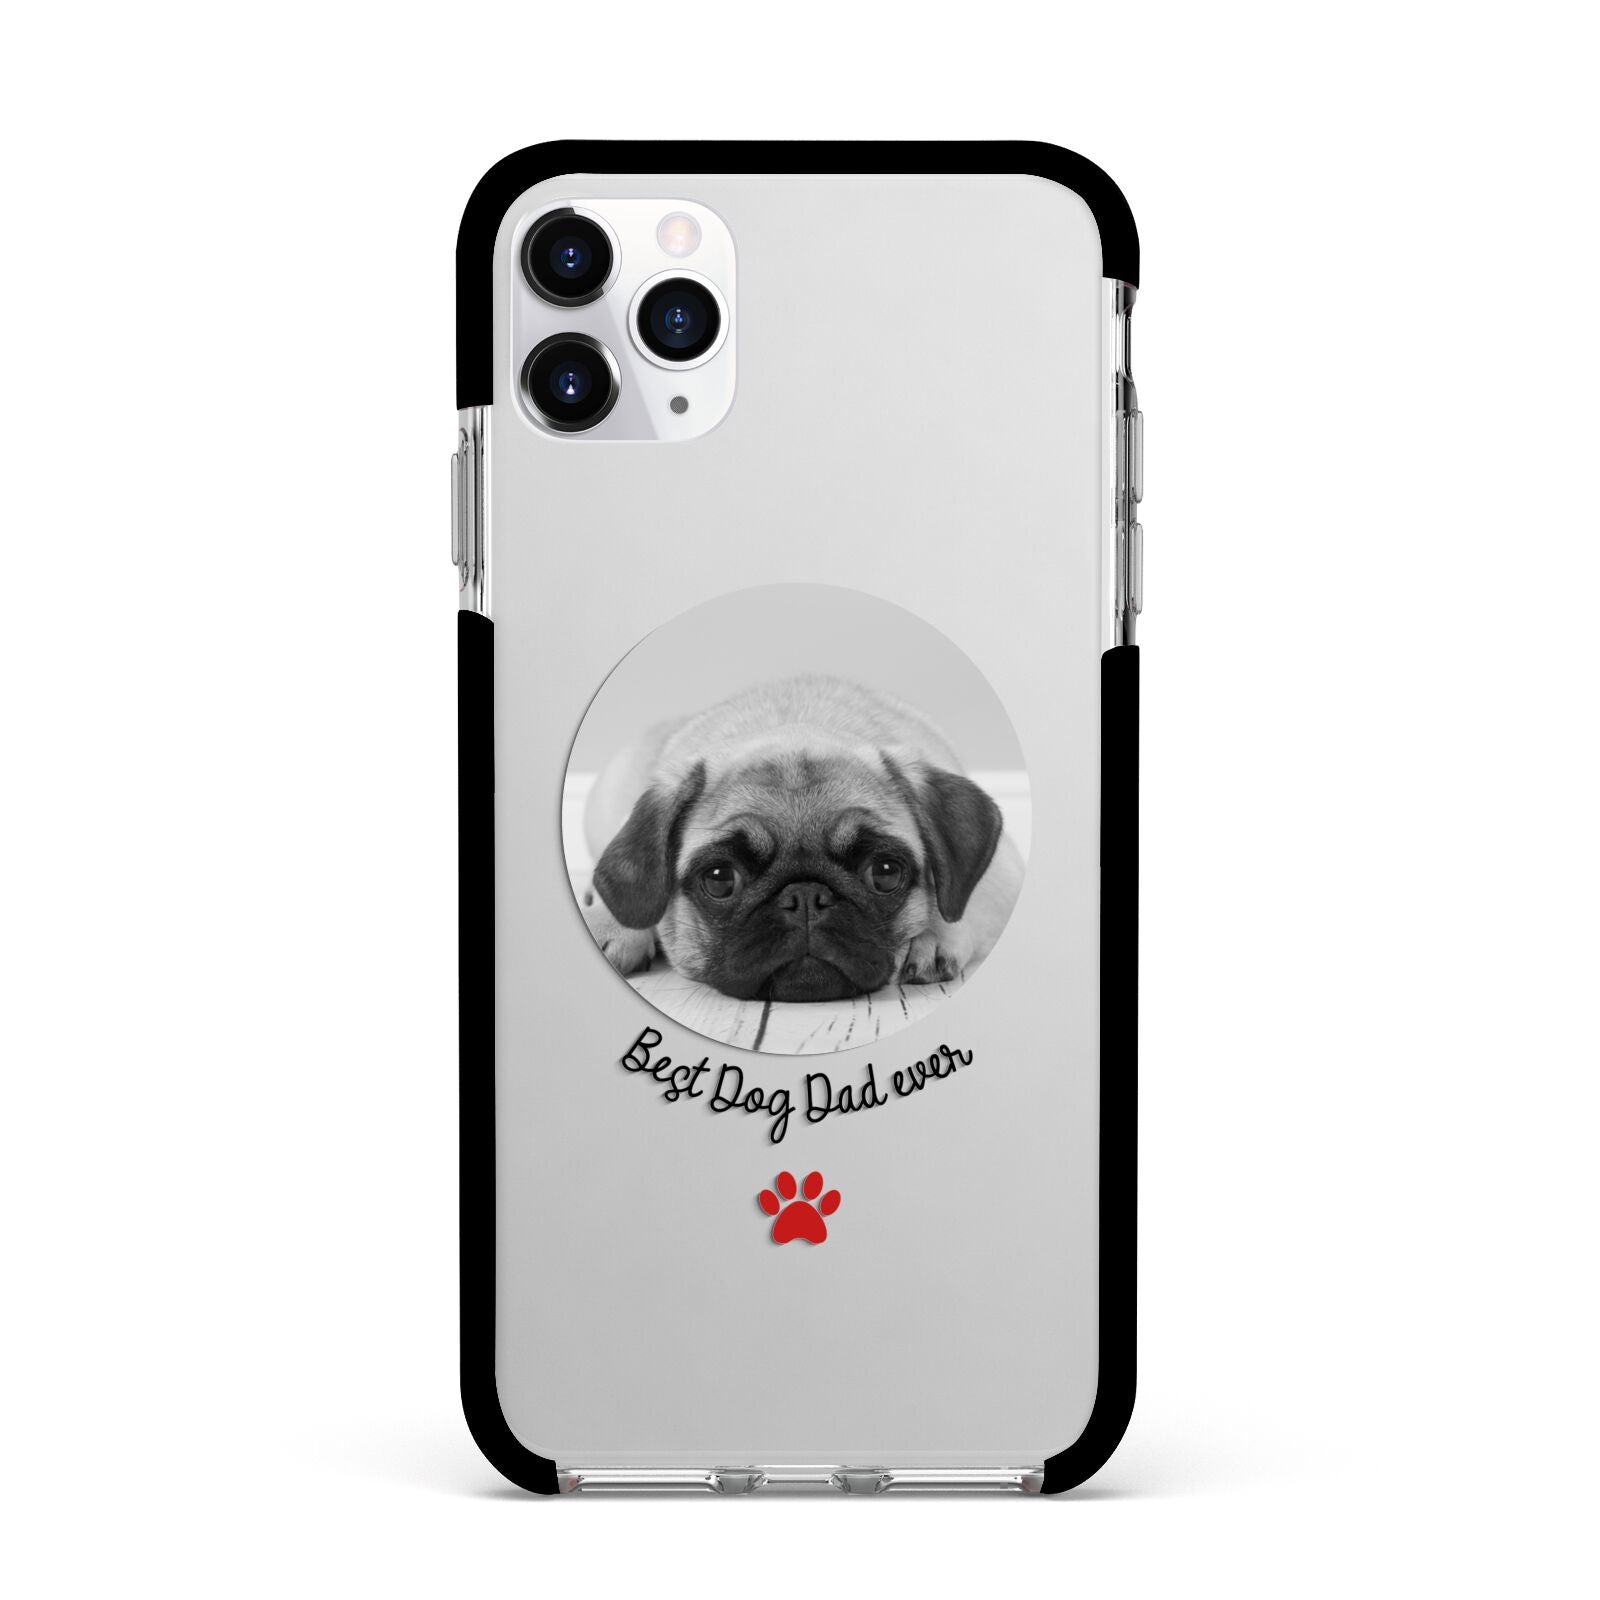 Best Dog Dad Ever Photo Upload Apple iPhone 11 Pro Max in Silver with Black Impact Case